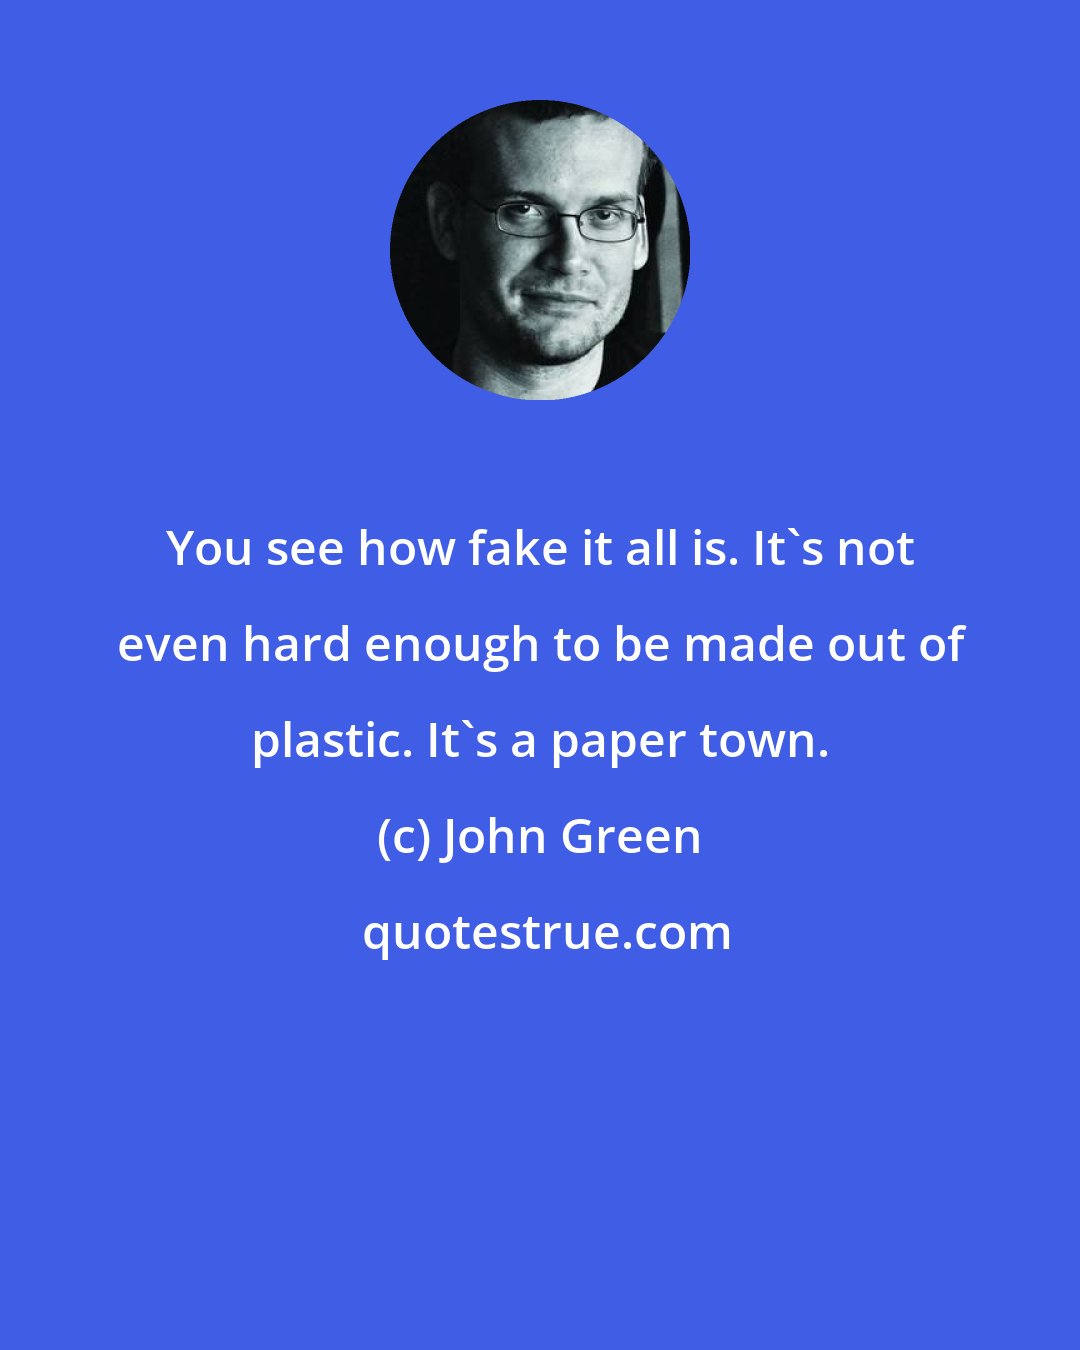 John Green: You see how fake it all is. It's not even hard enough to be made out of plastic. It's a paper town.